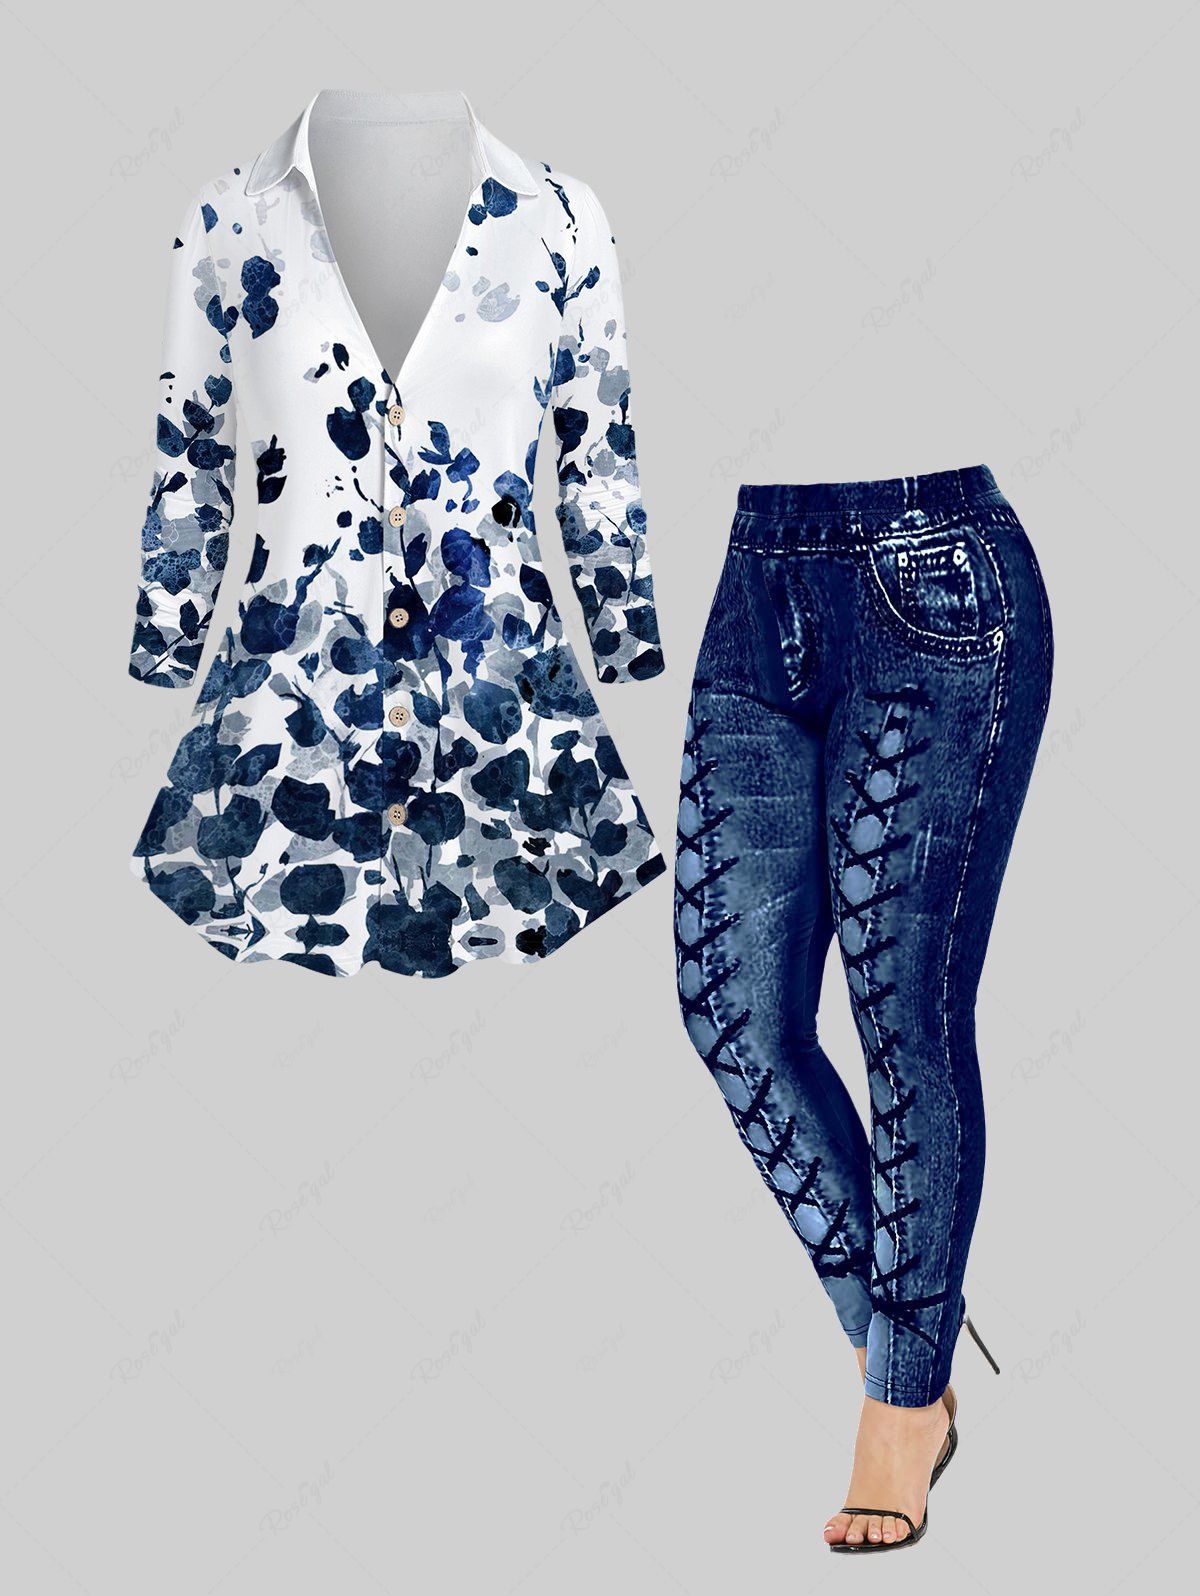 Store Plus Size Ink Printing Button Up Shirt and 3D Denim Printed Leggings Outfit  